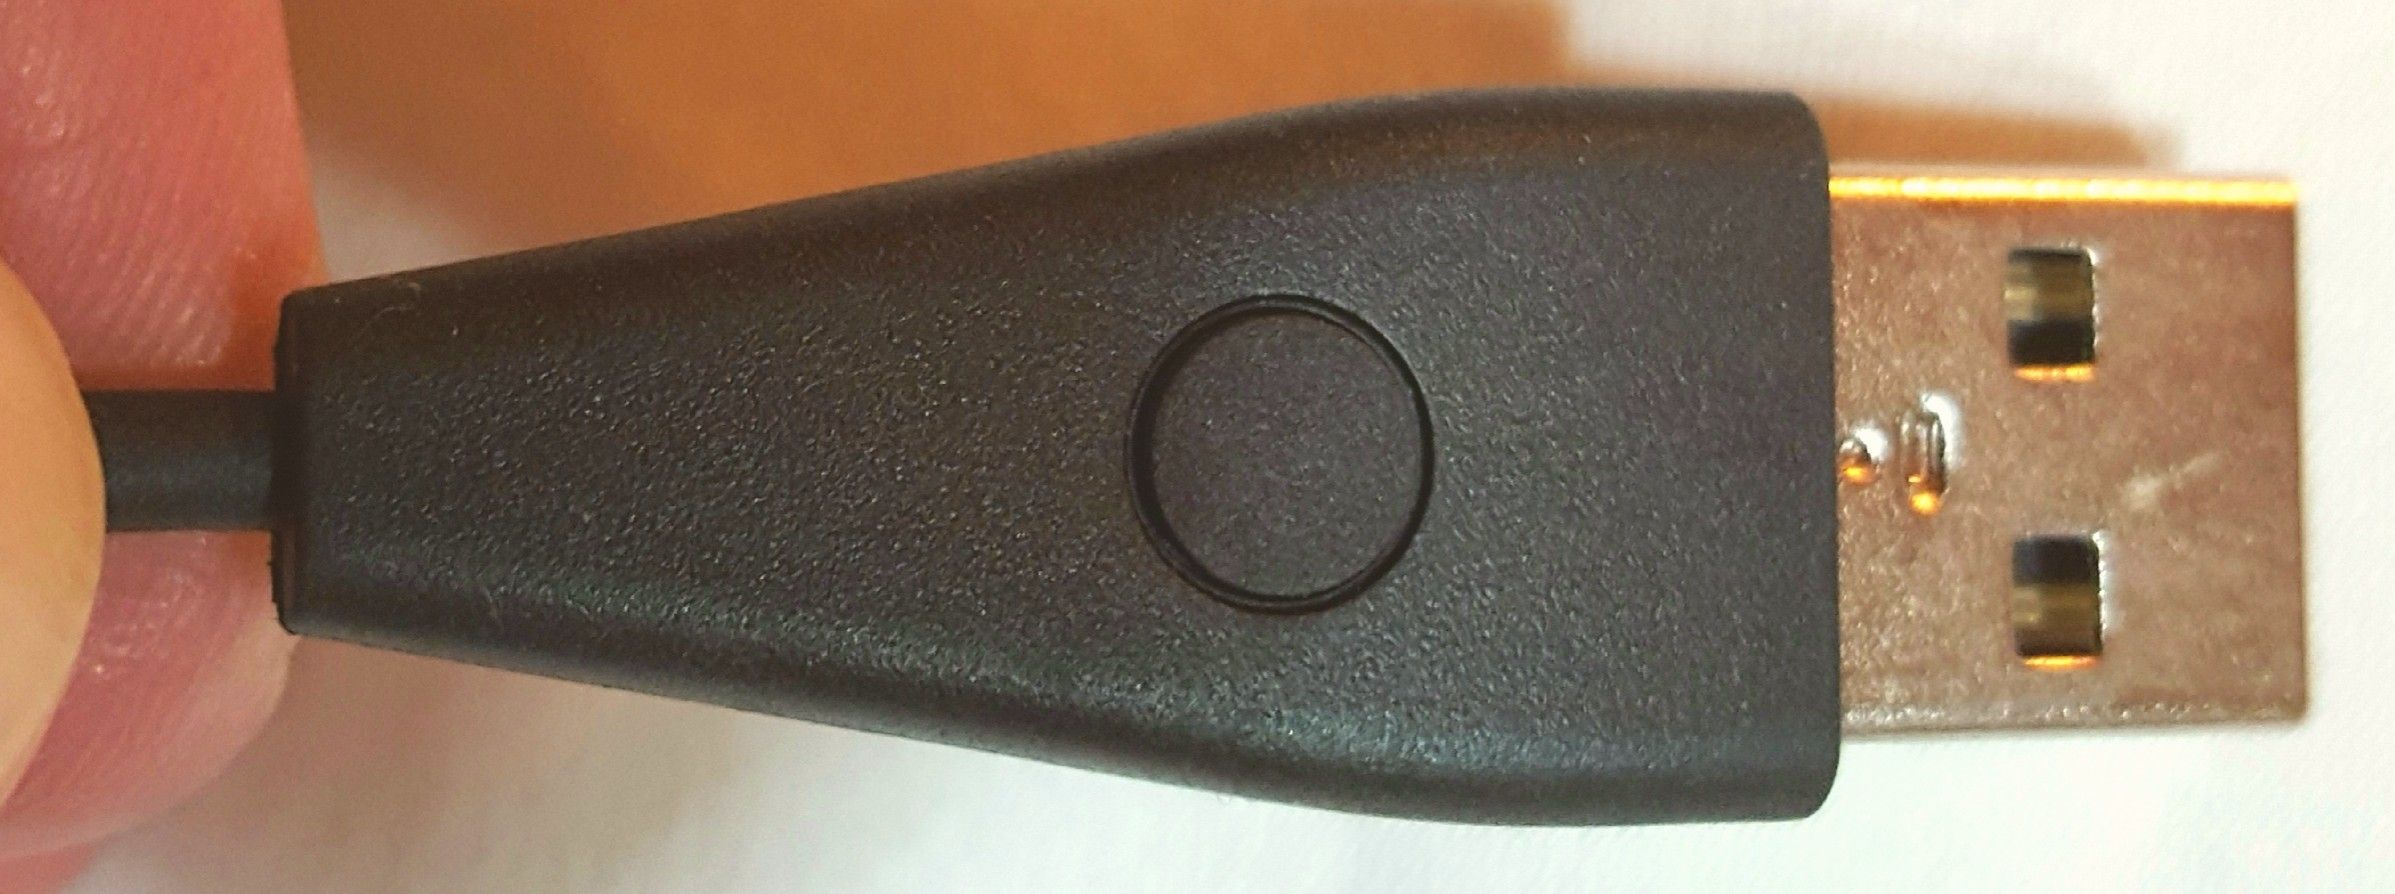 button on fitbit alta charger